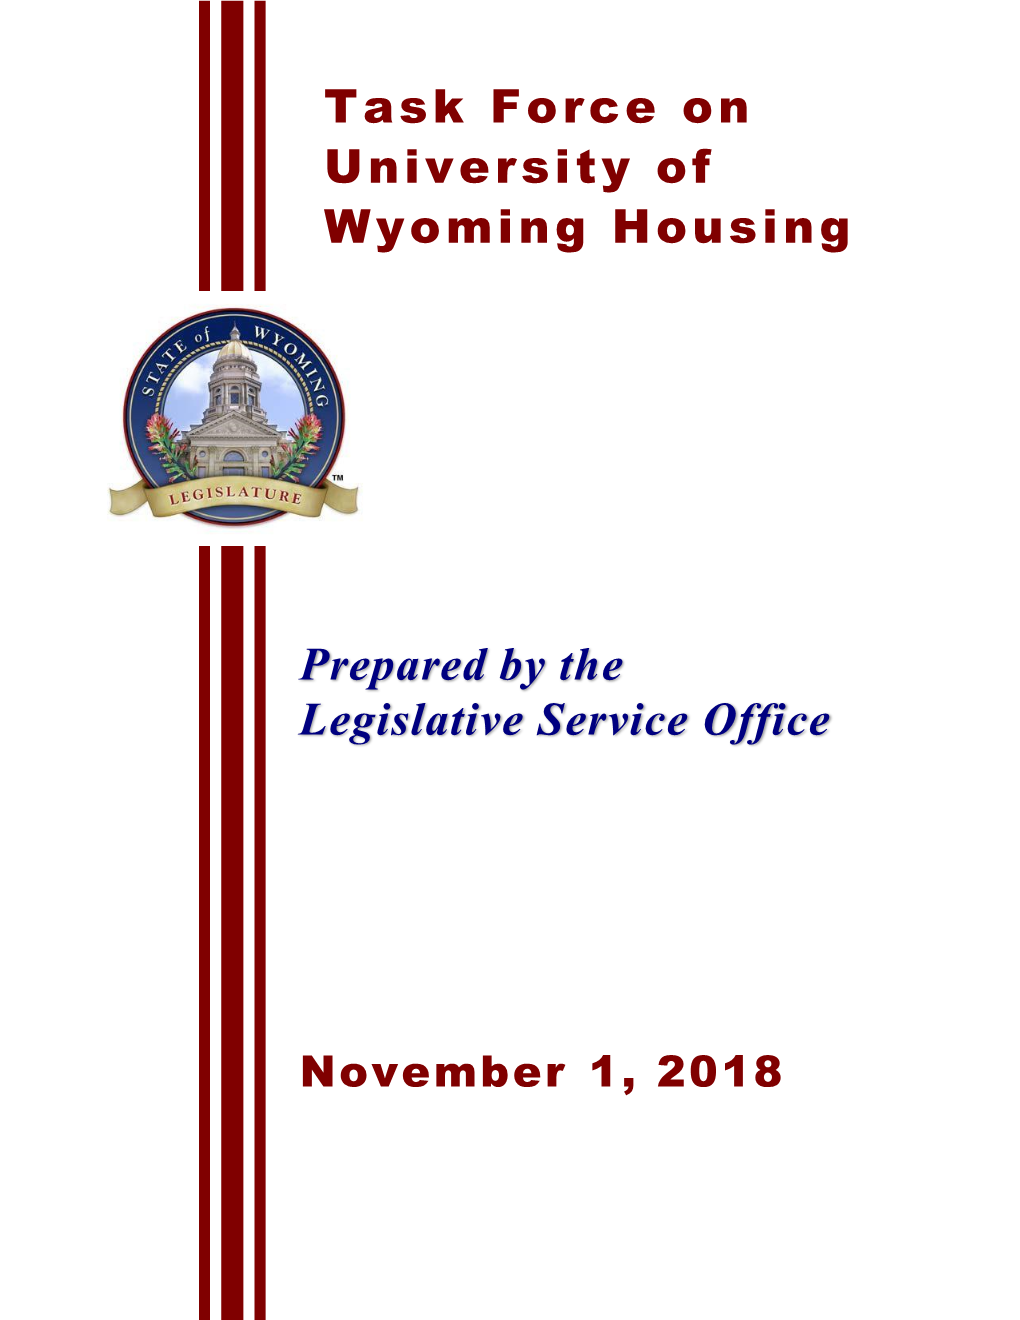 Task Force on University of Wyoming Housing Prepared by The